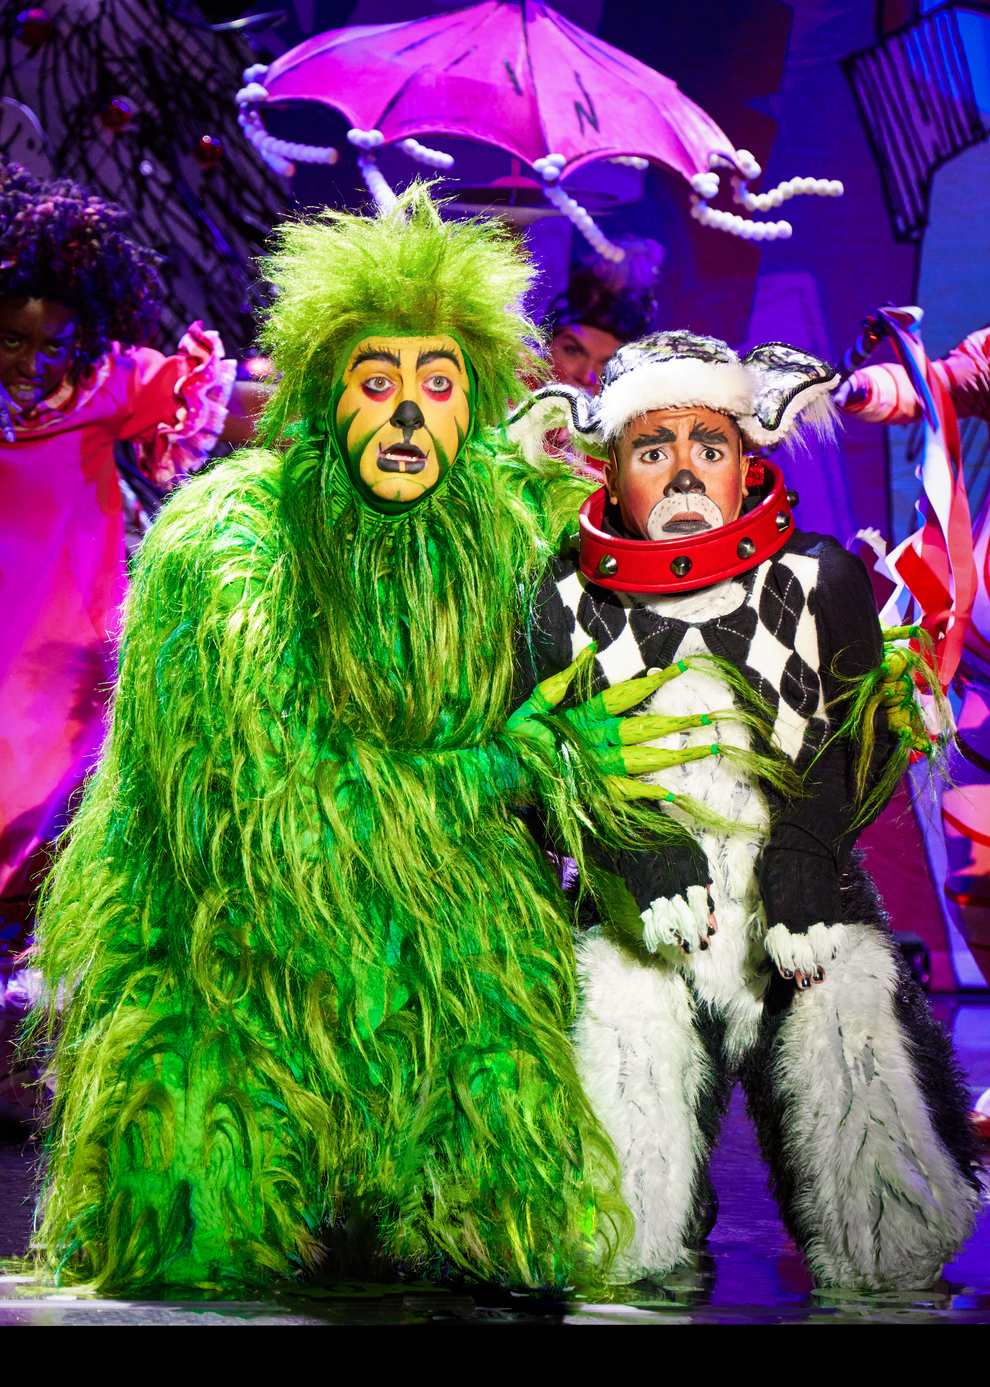 Dr. Seuss' How the Grinch Stole Christmas! The Musical transports the audience to the whimsical world of Whoville through striking sets, engaging cast members, and an overarching theme of kindness.